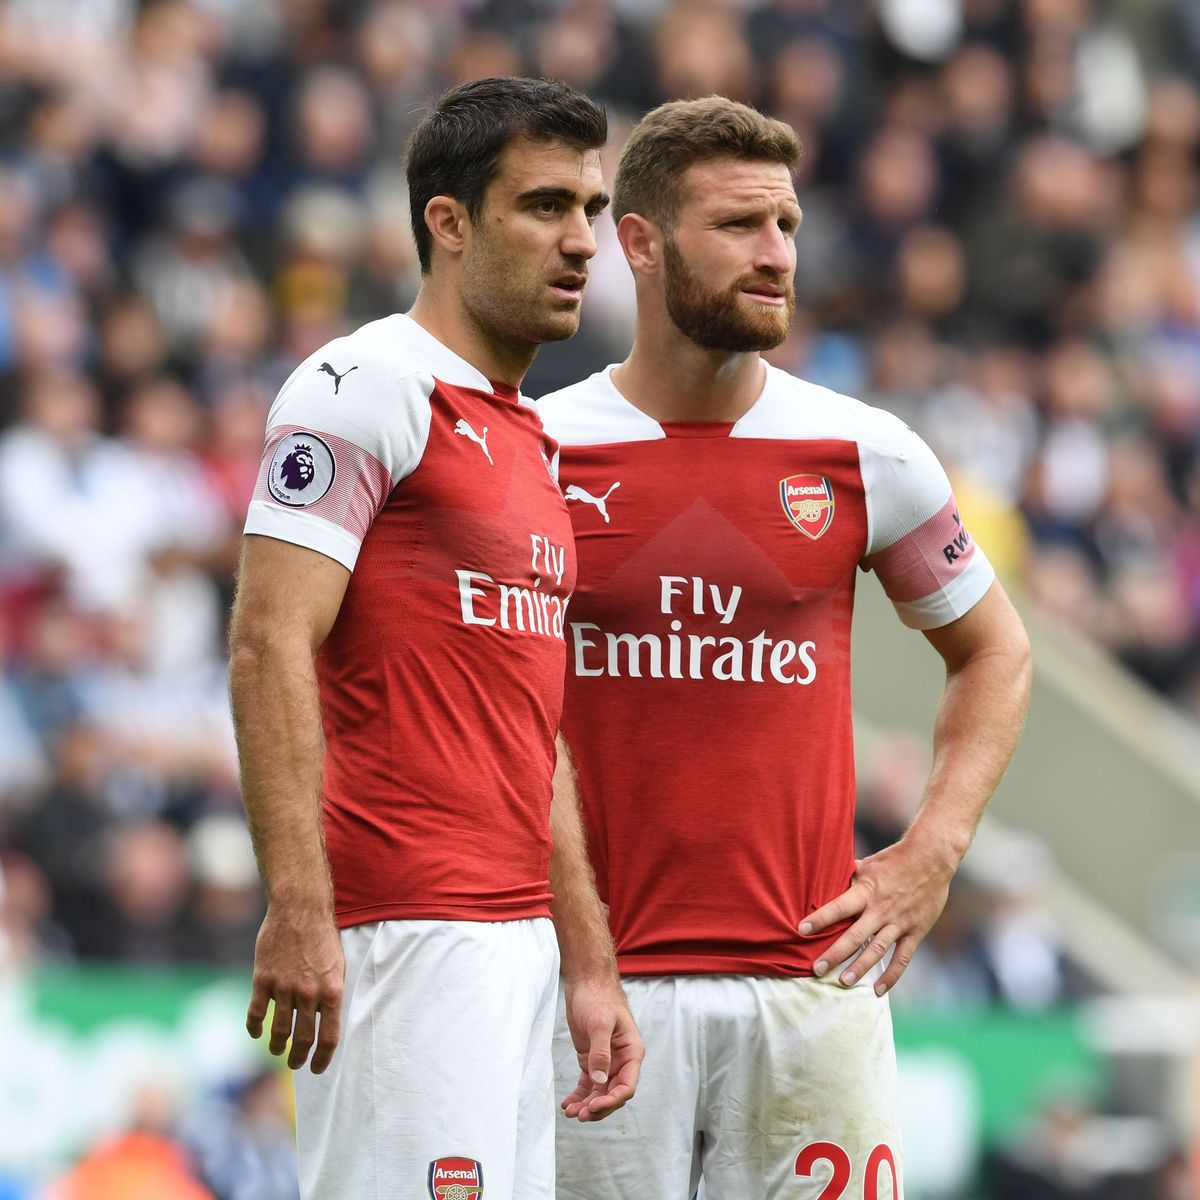 Arsenal power rankings: The Sokratis question as Chambers gains and Koscielny and Mustafi tumble